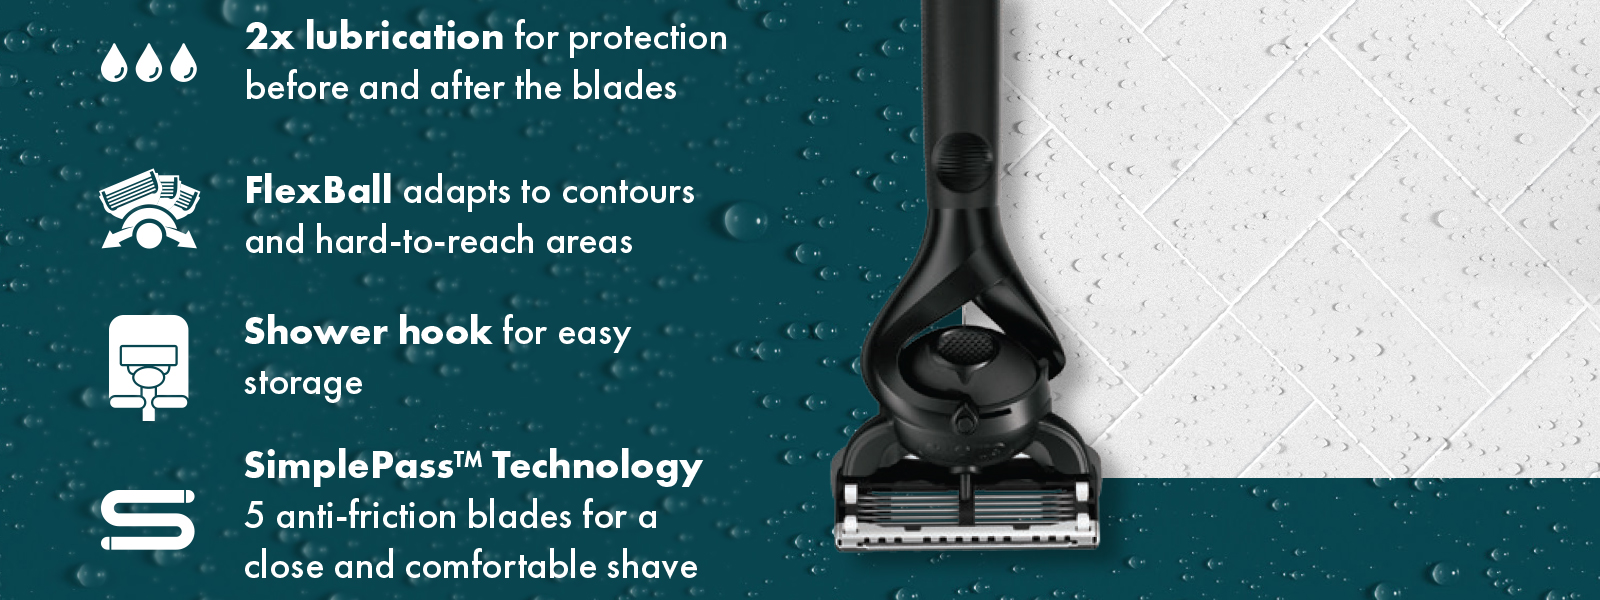 2x lubrication for protection before and after the blades. FlexBall adapts to contours and hard-to-reach areas. Shower hook for easy storage. Simple Pass Technology 5 anti-friction blades for a close and comfortable shave